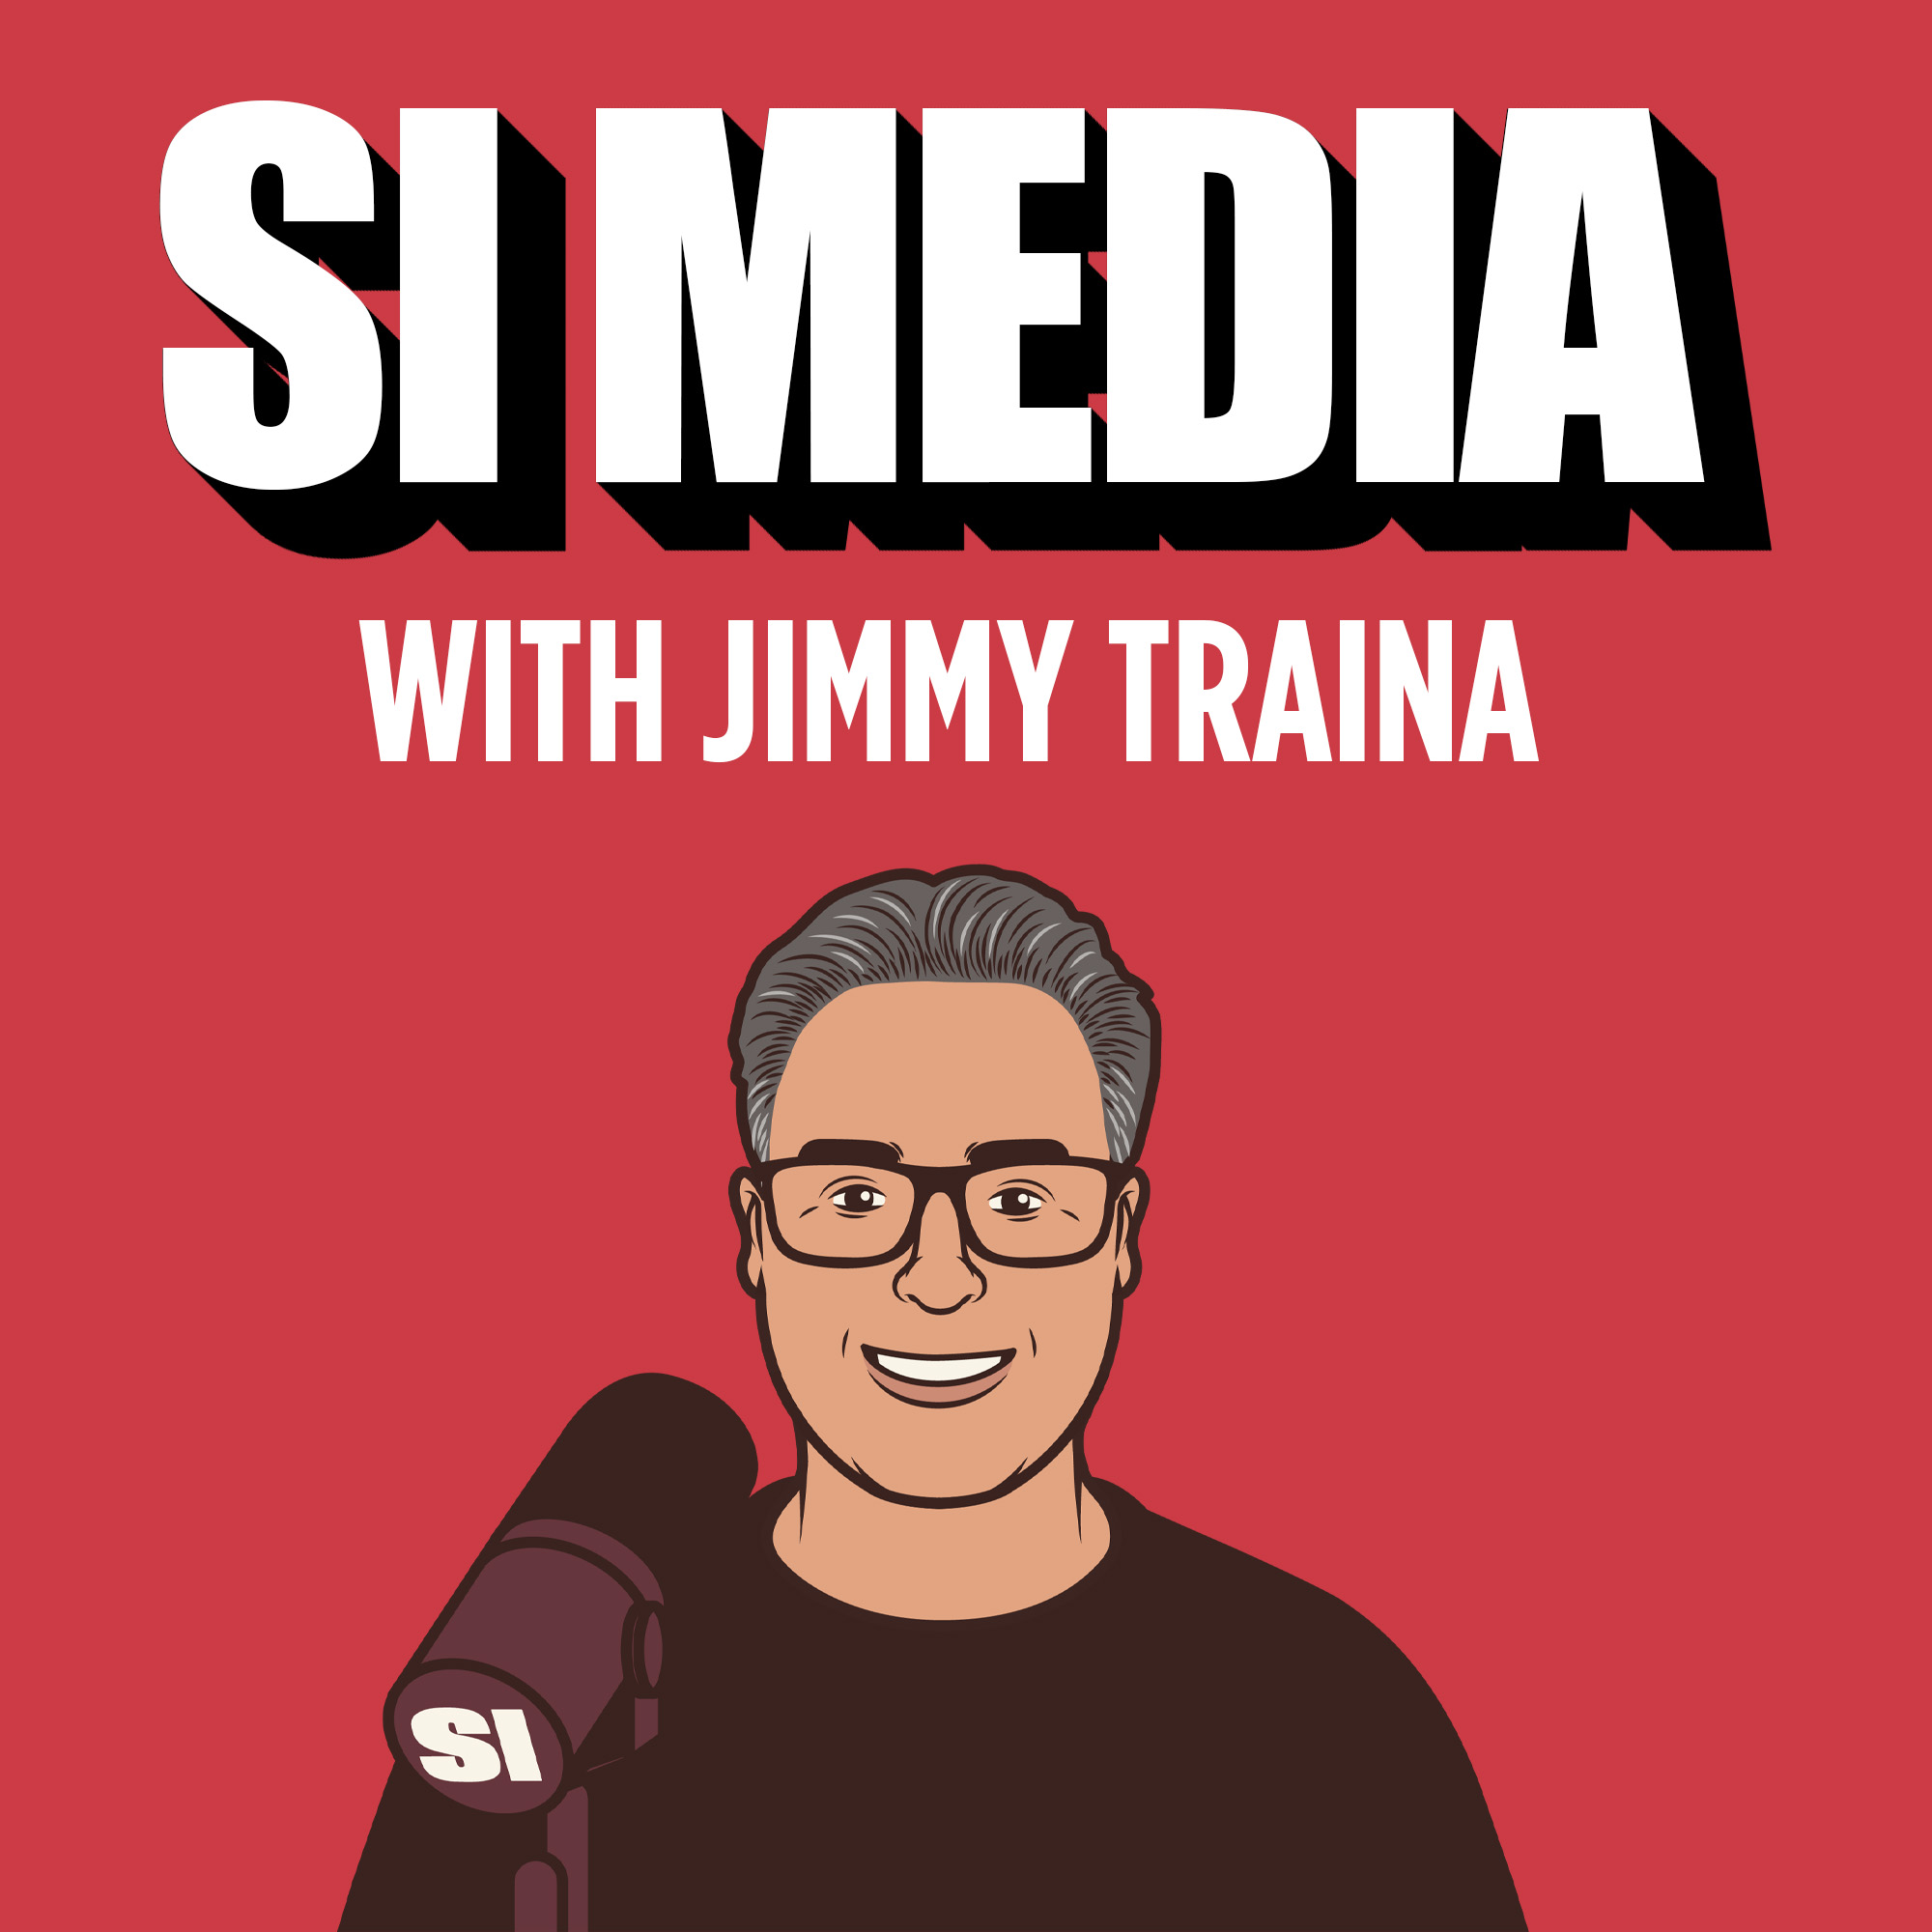 Bryan Curtis on Sports Media + Traina Thoughts